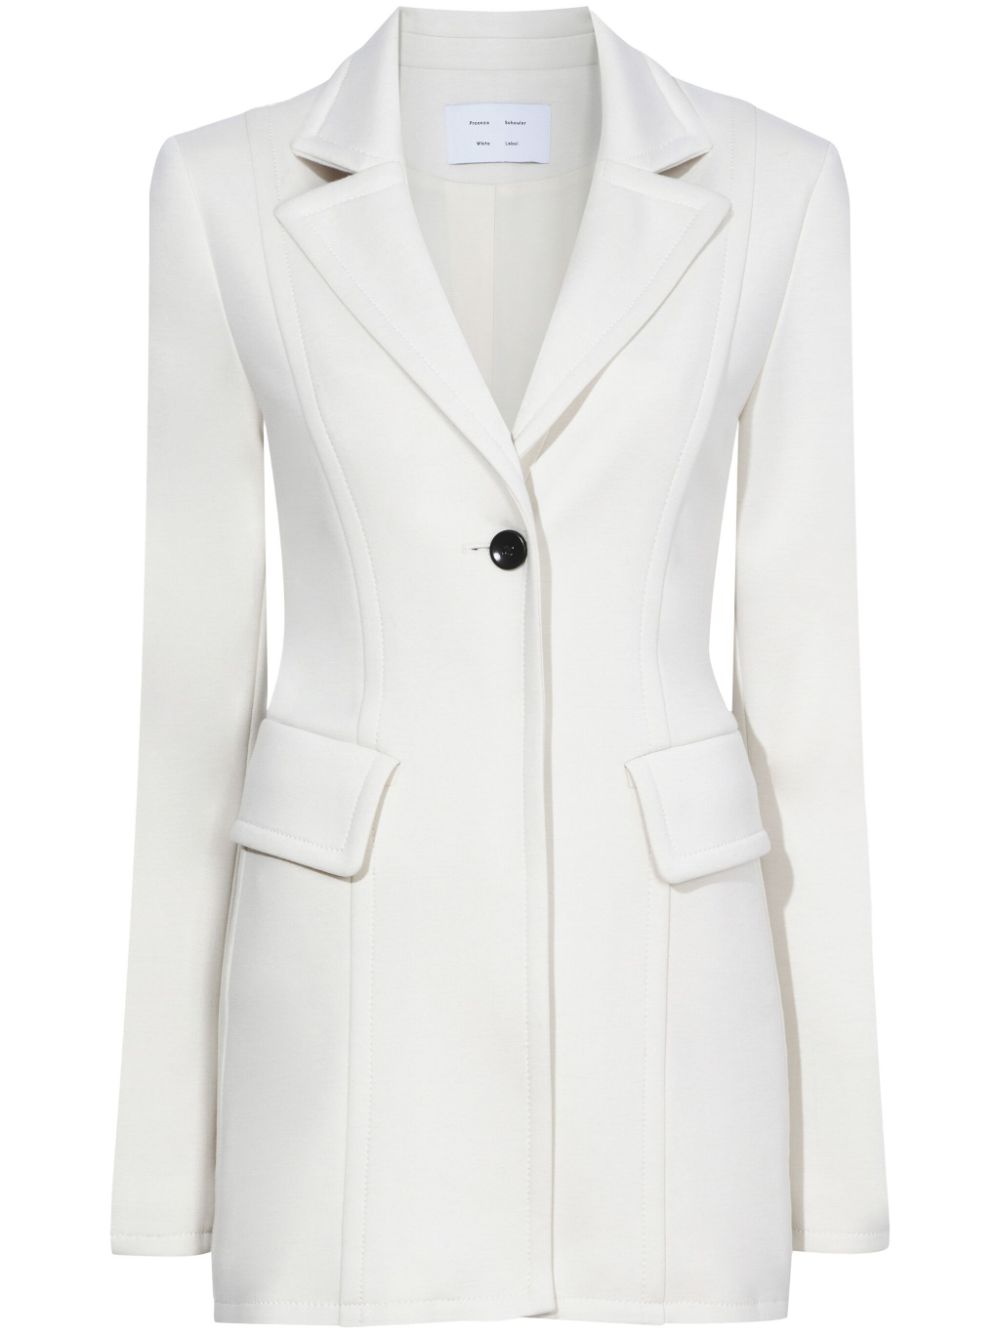 Proenza Schouler White Label notched-collar long blazer von Proenza Schouler White Label